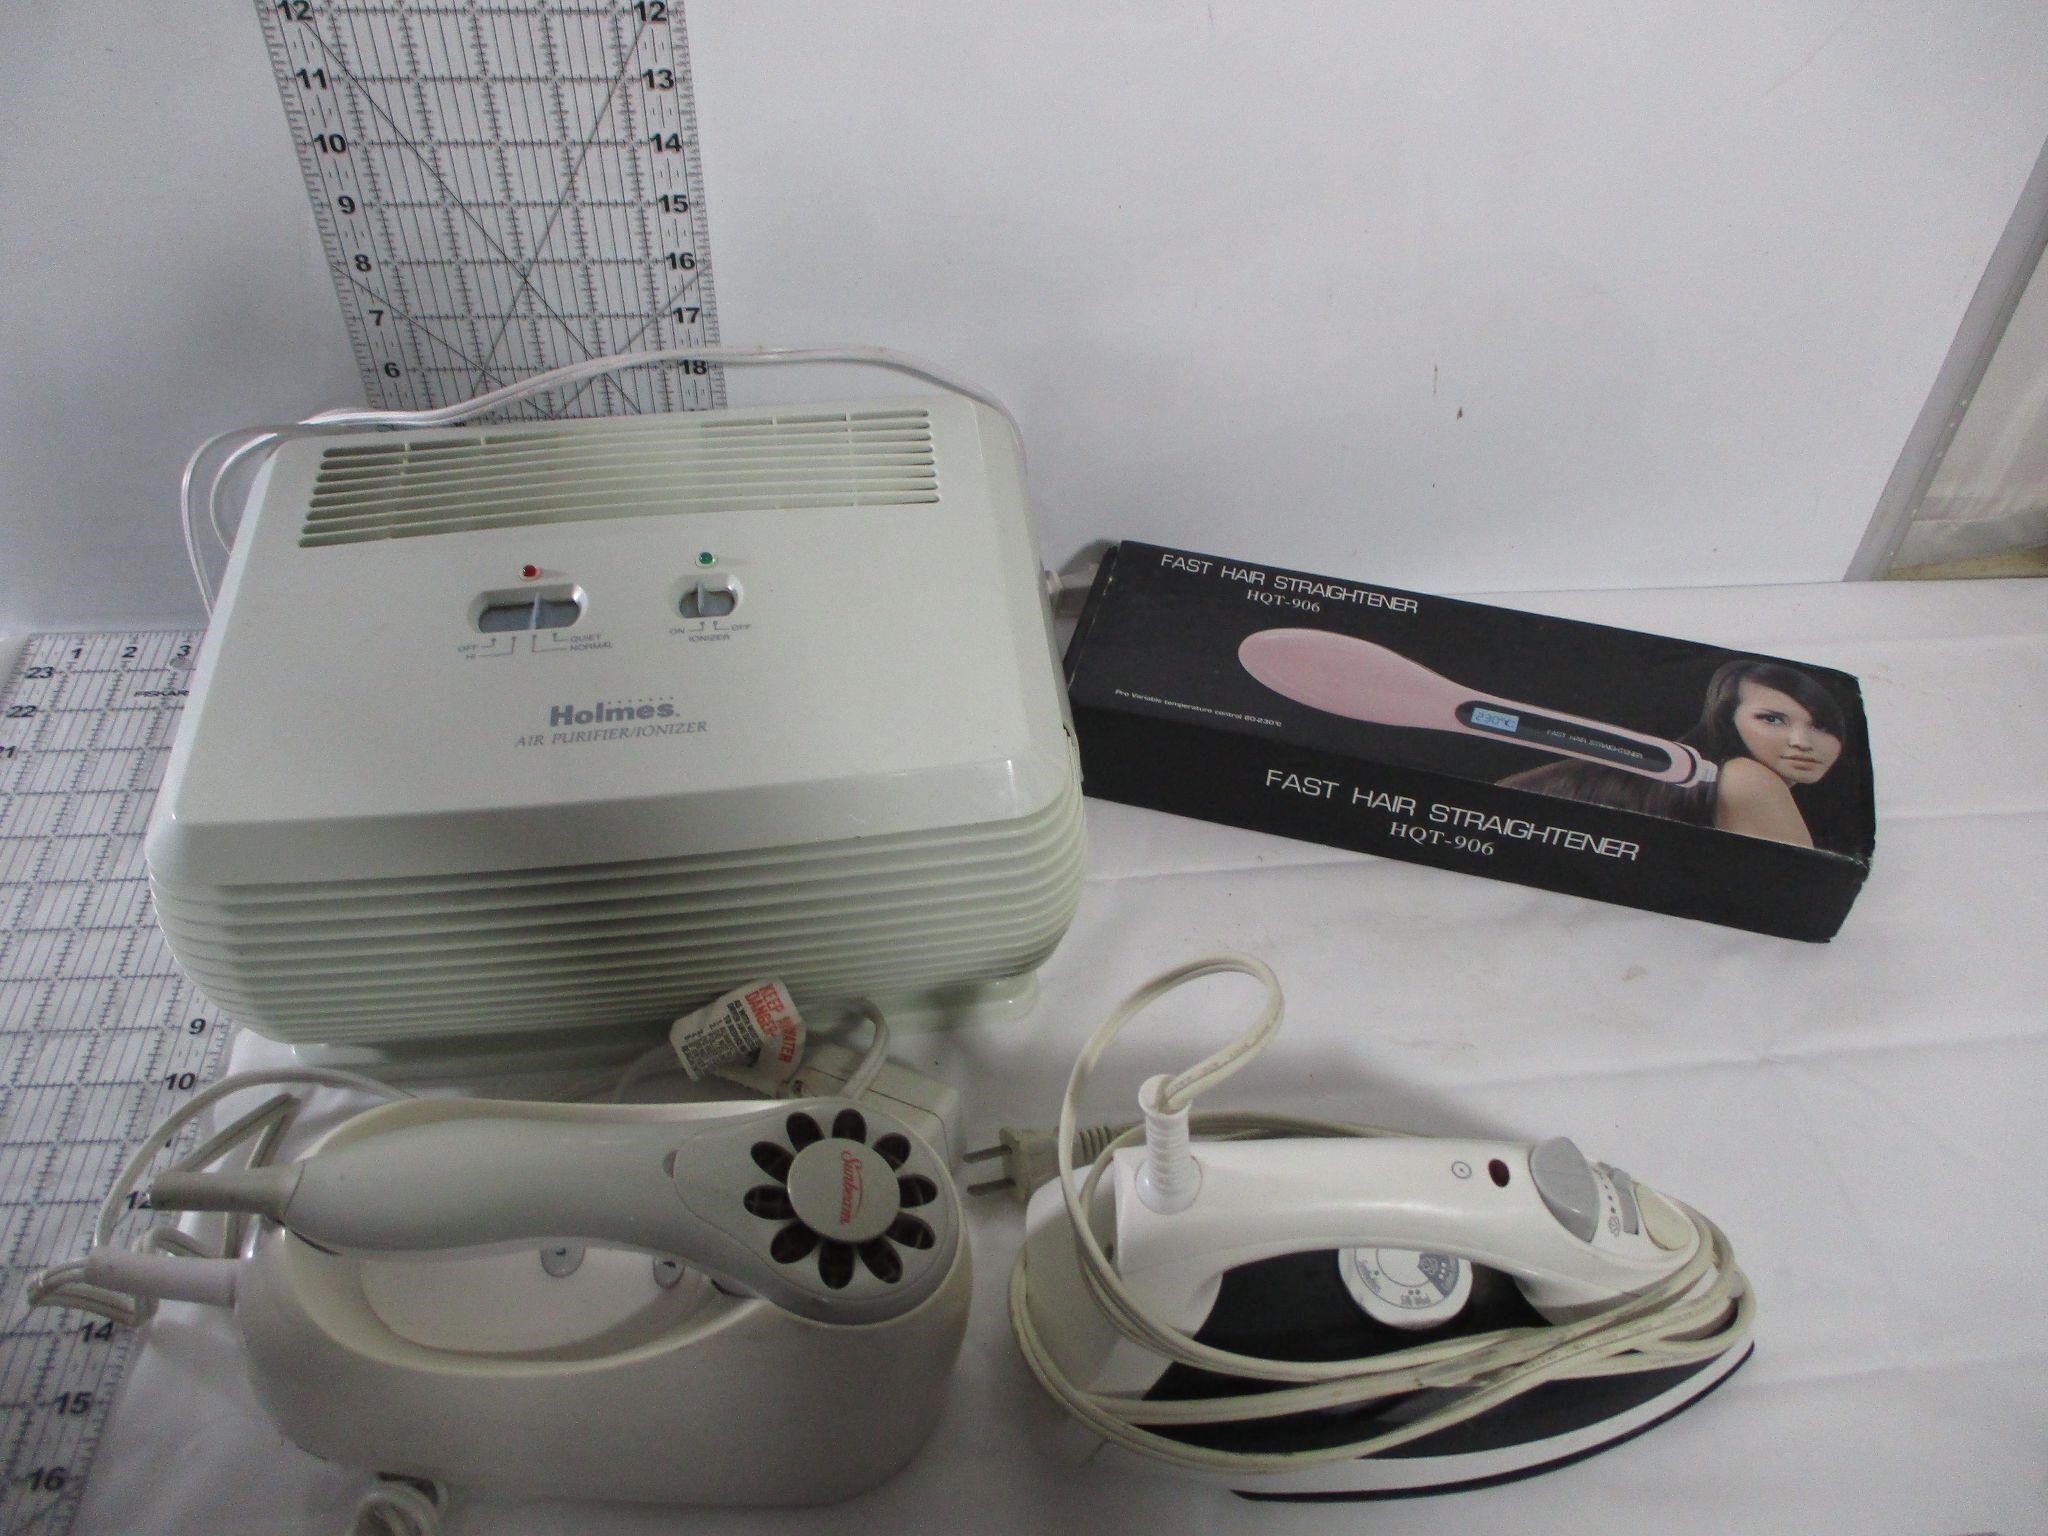 Holmes Air Purifier and Personal Appliances